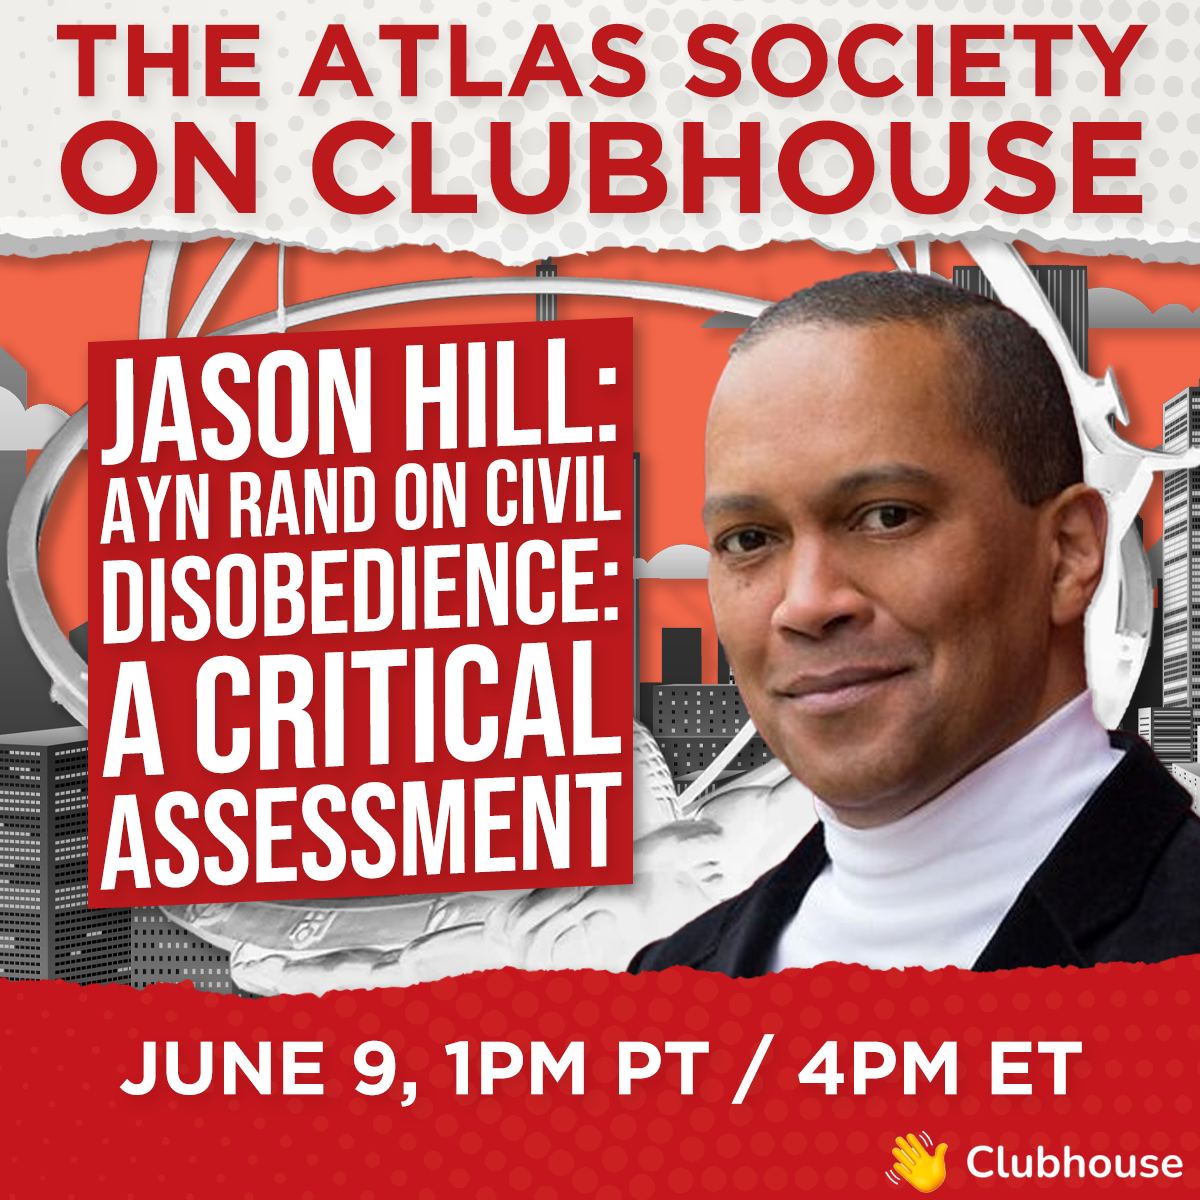 Jason Hill - Ayn Rand on Civil Disobedience: A Critical Assessment